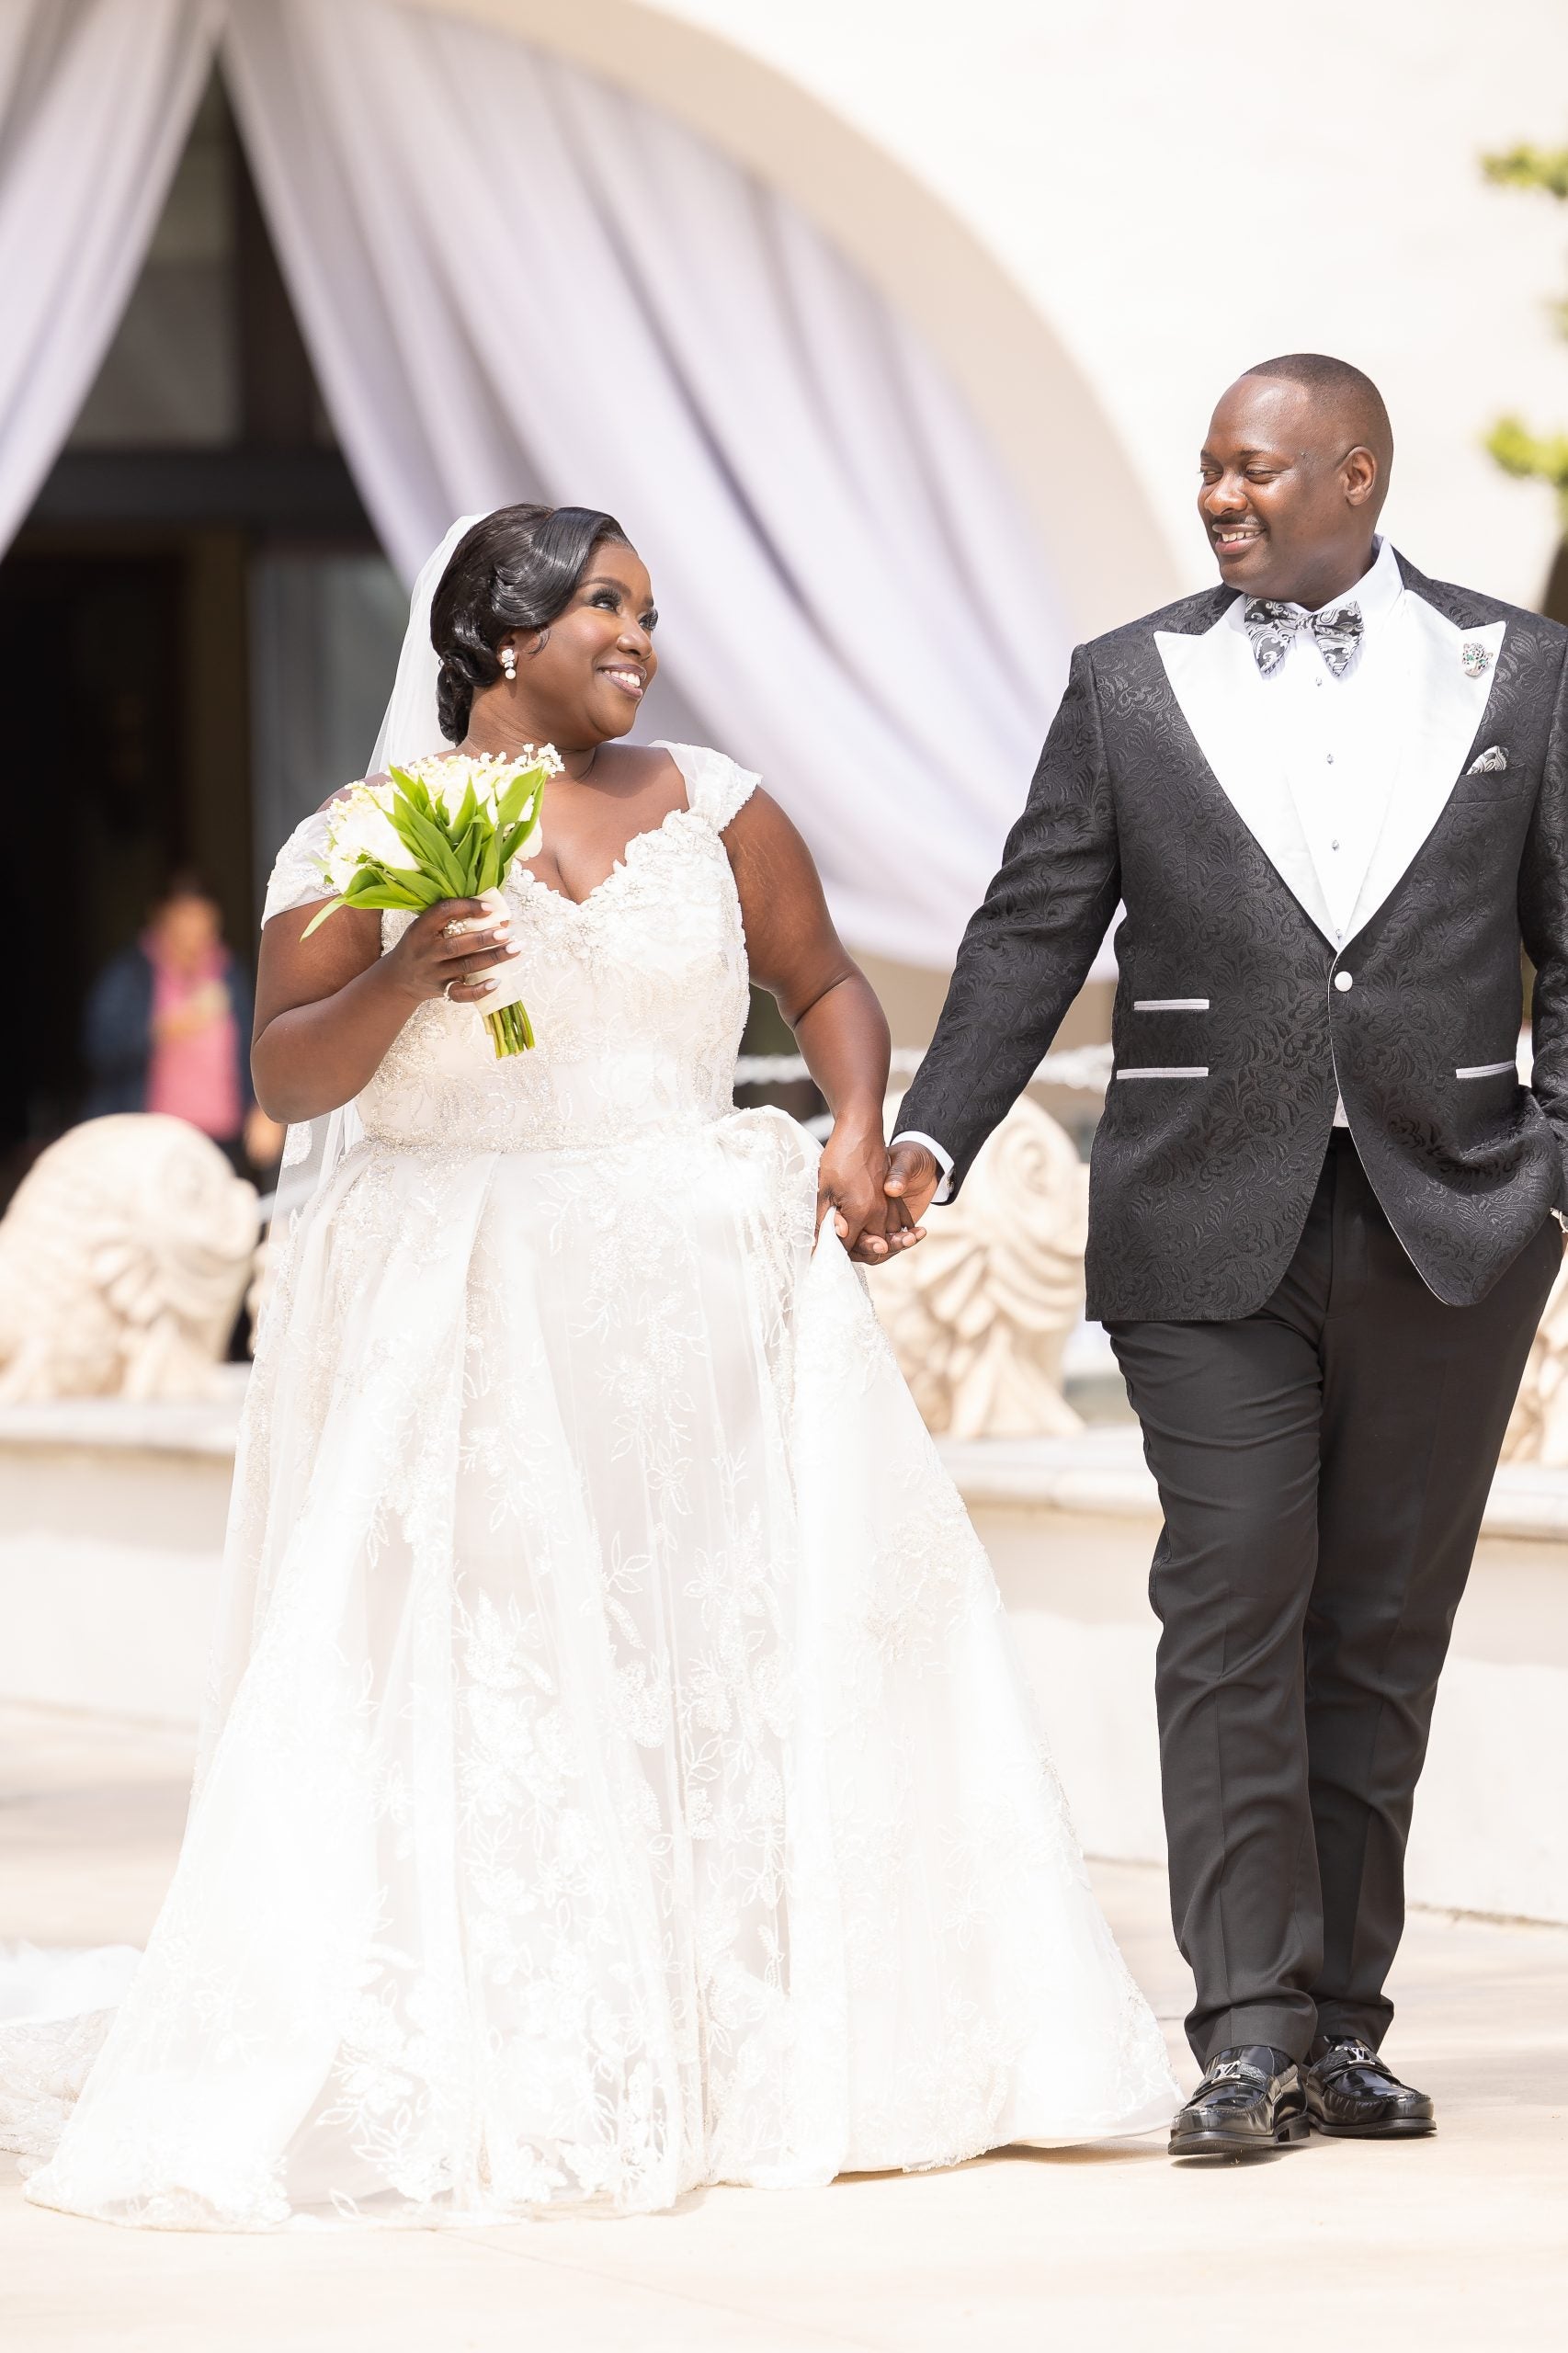 Bridal Bliss: Kelley And Moreno’s Vintage Black Hollywood Themed Wedding Brought Out The Stars Of Today